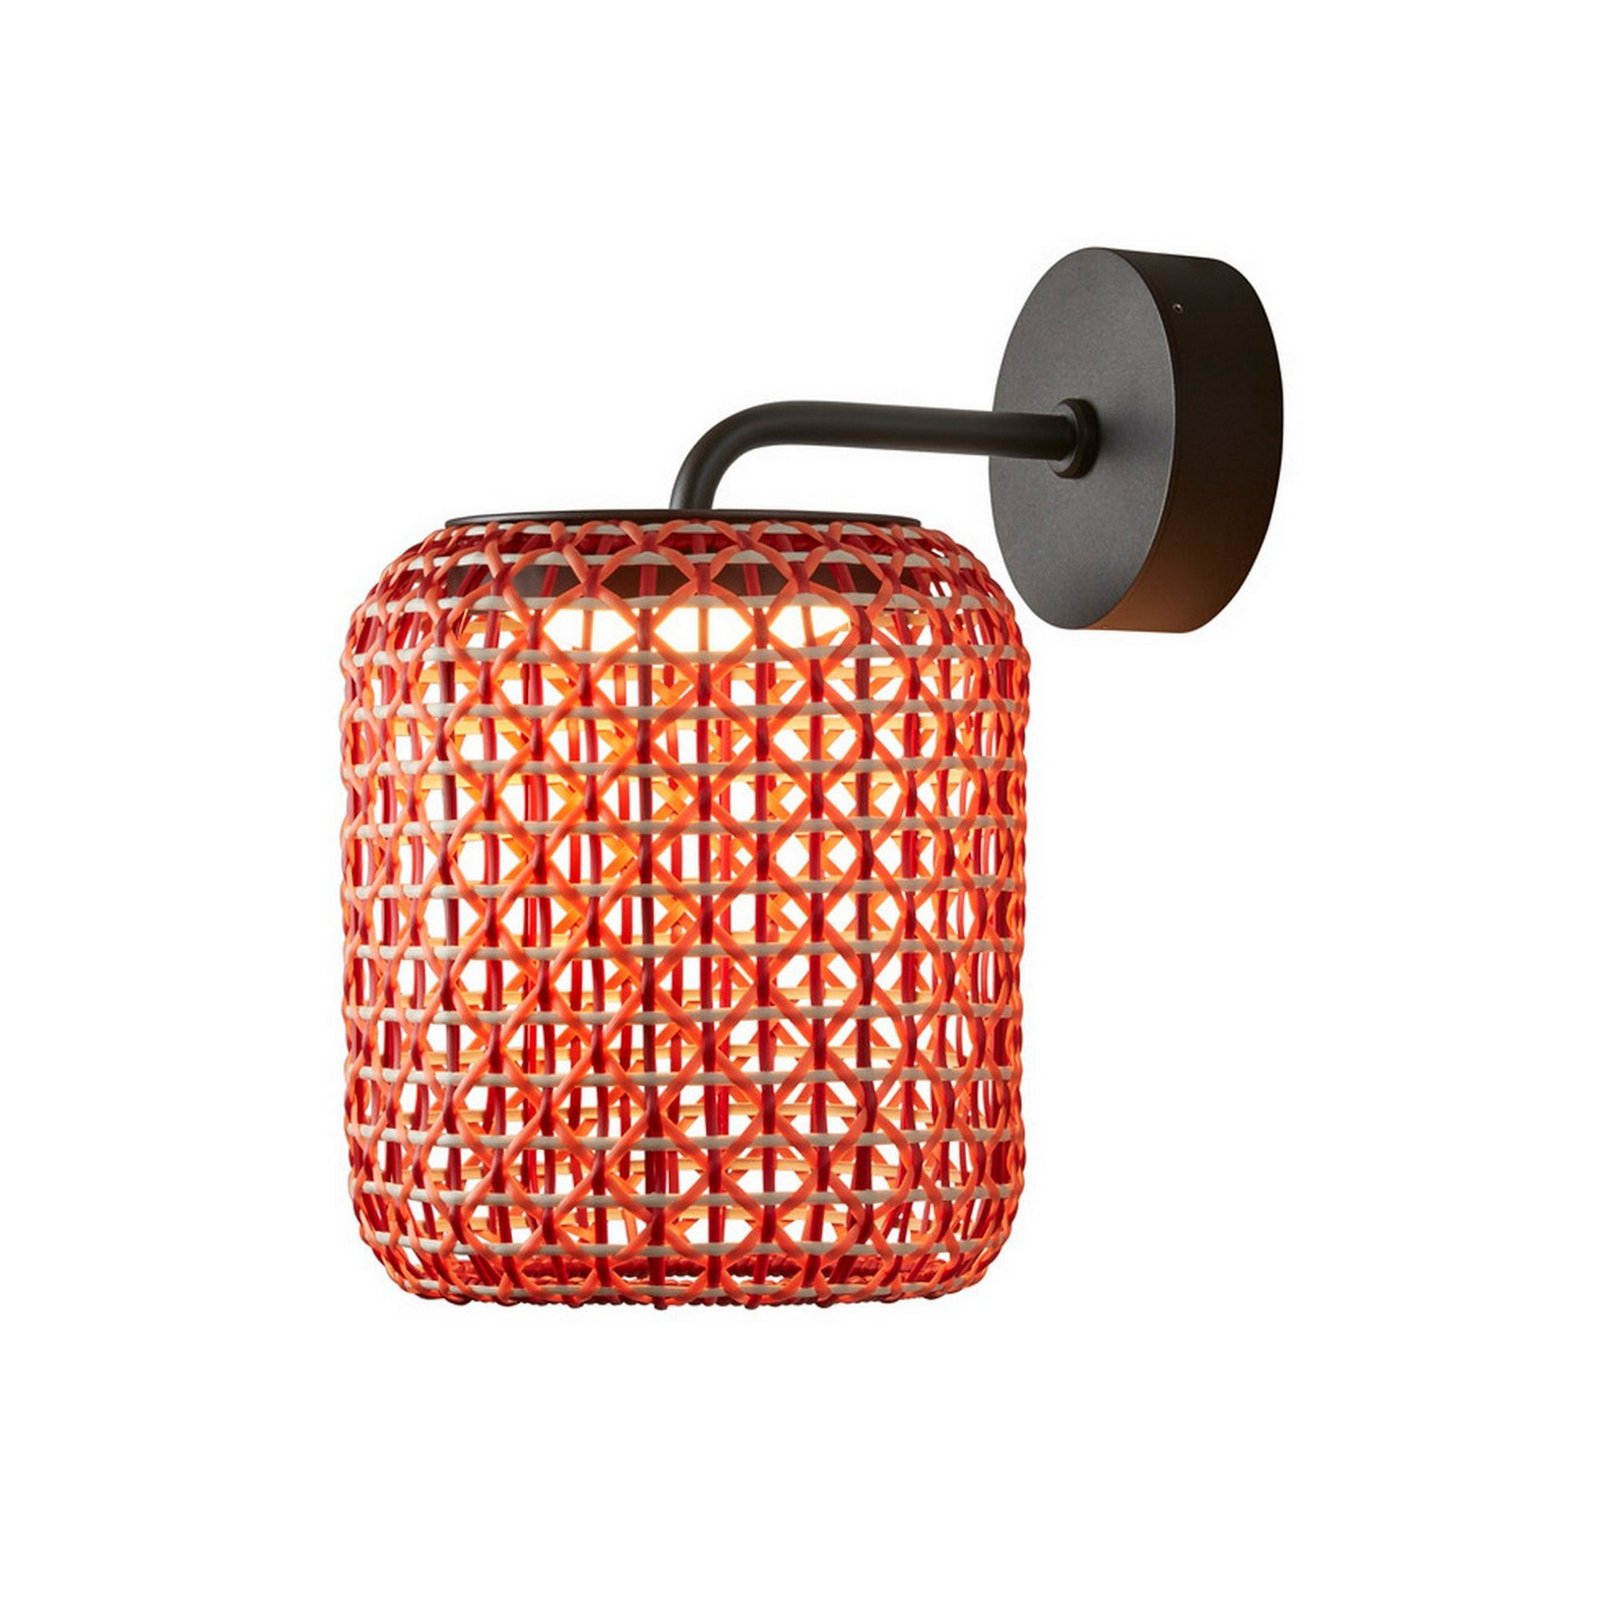 Bover Nans A LED outdoor wall light red, Ø 21.6 cm